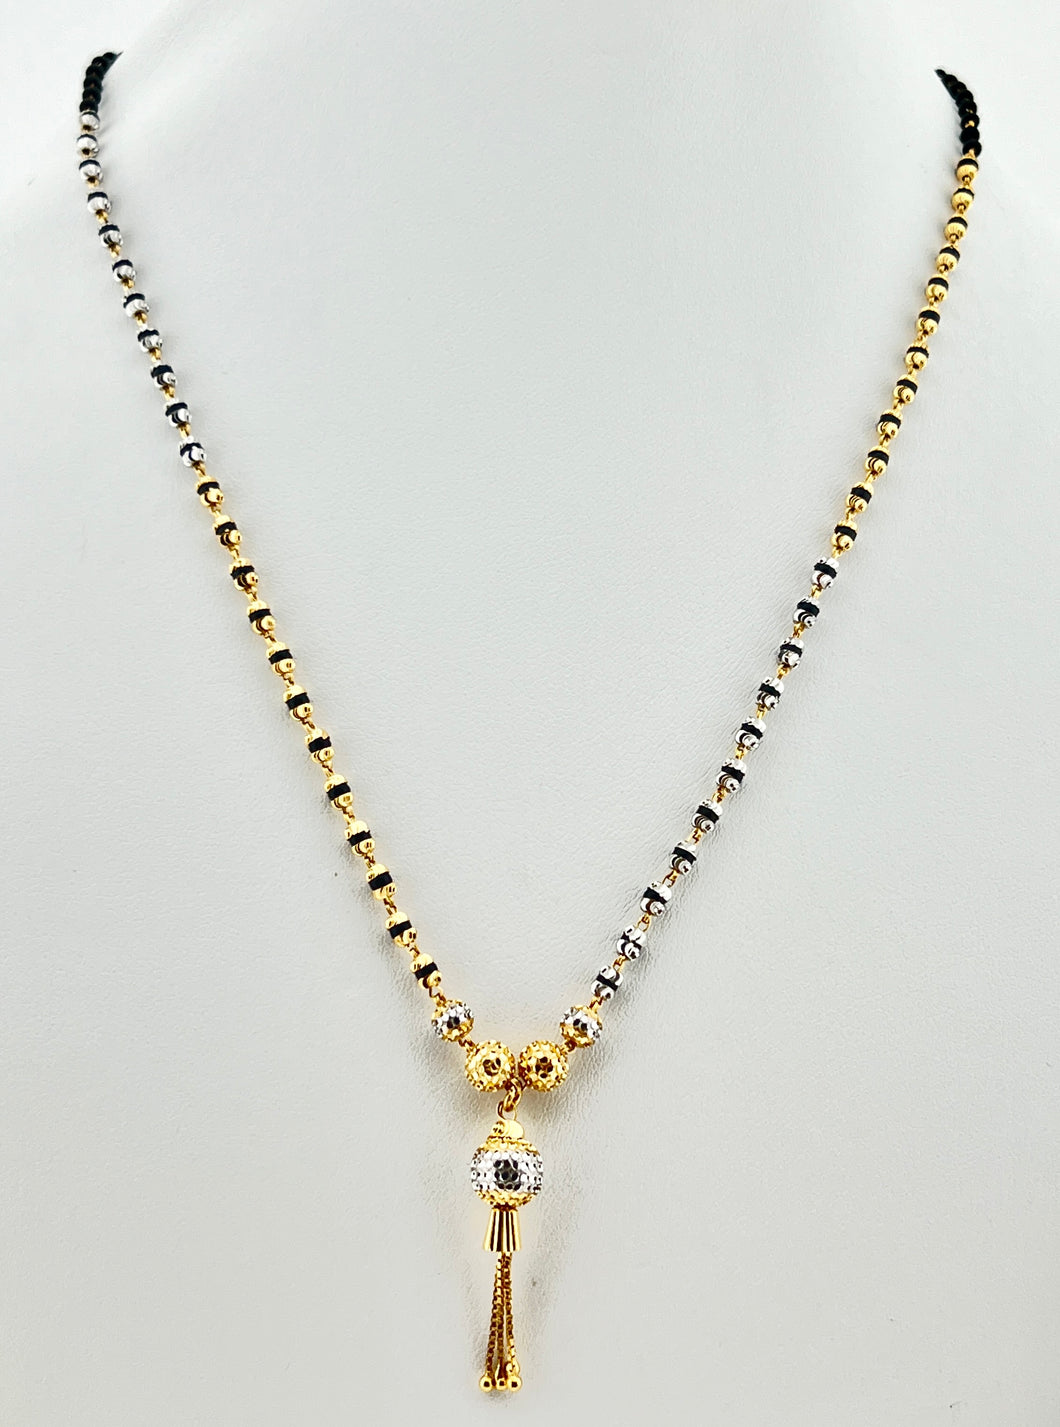 22K Solid Gold Two Tone Mangalsutra C4599 - Royal Dubai Jewellers